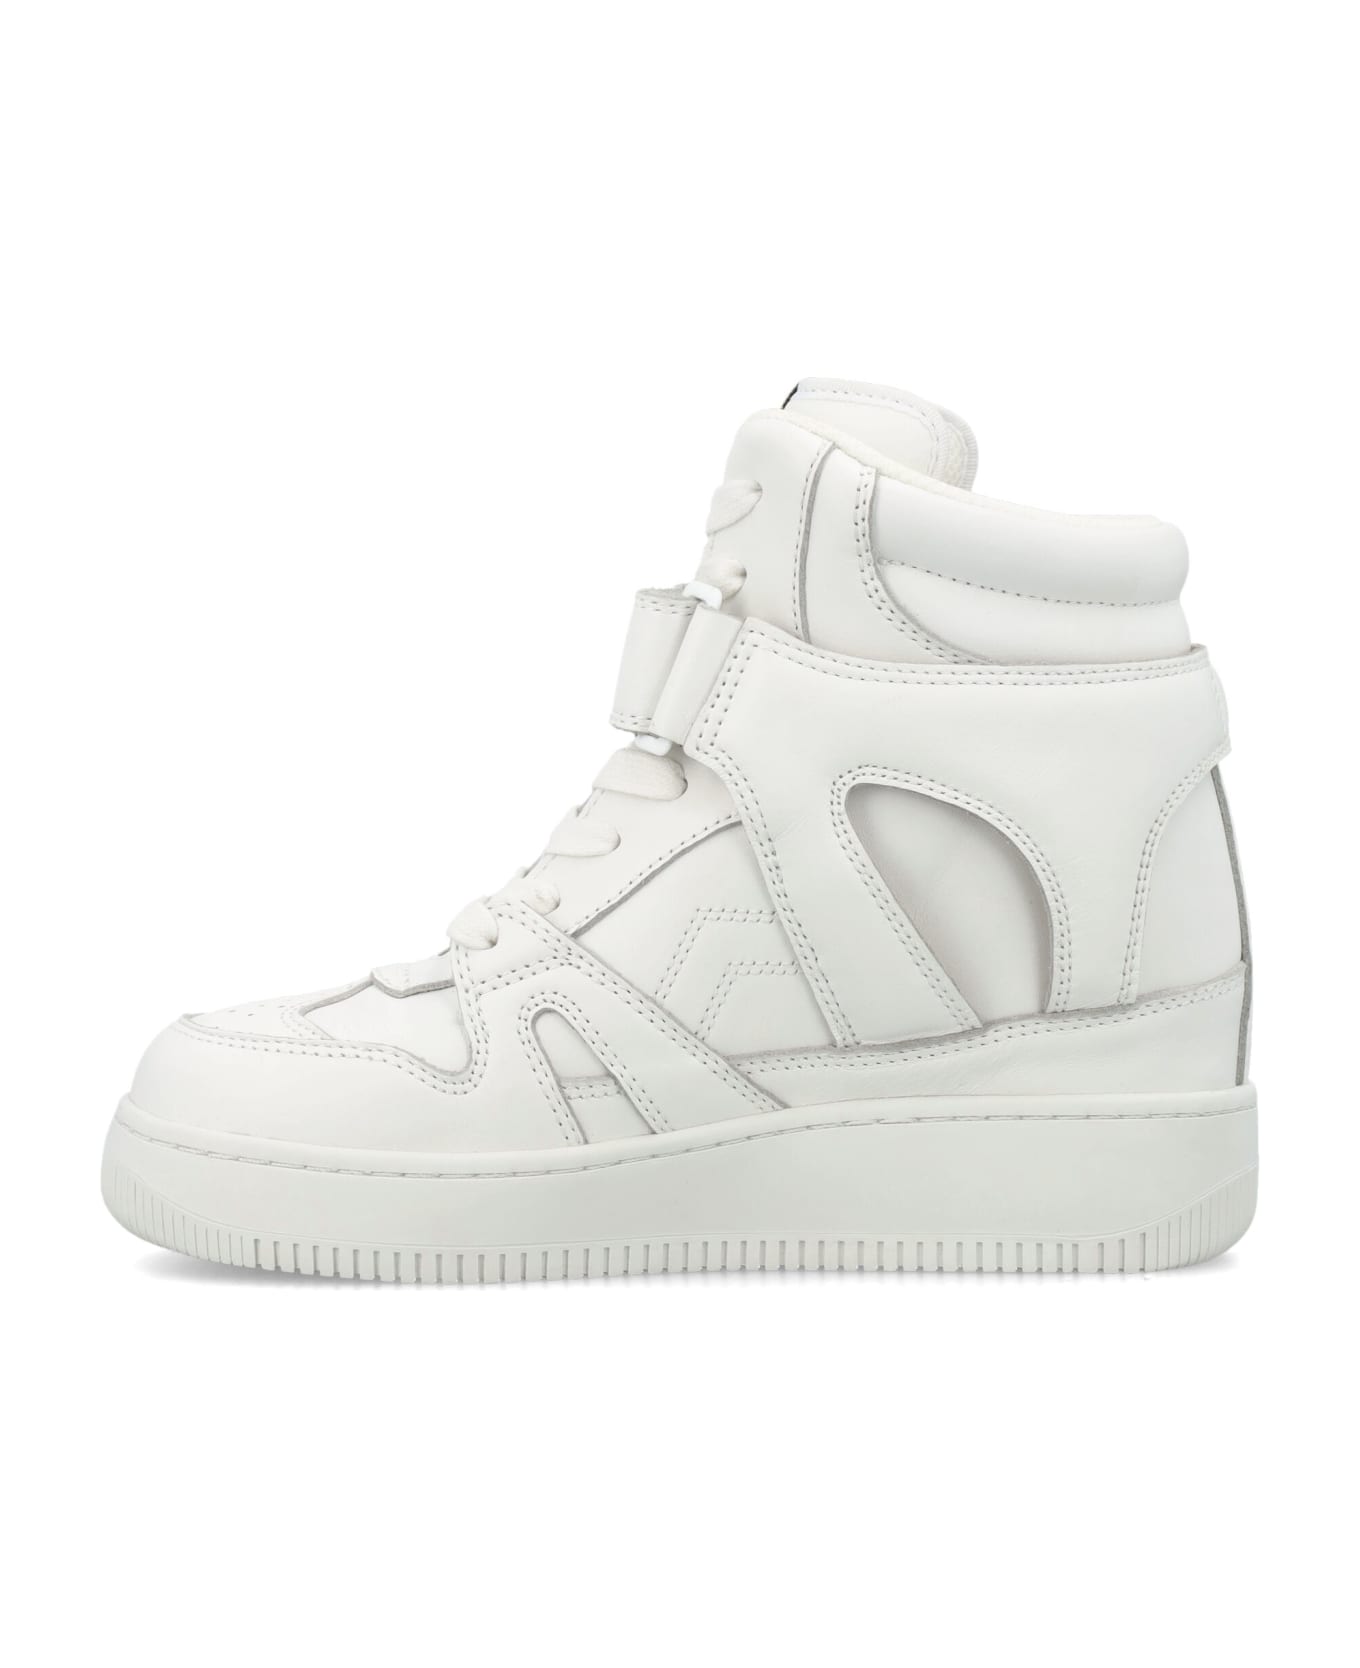 Isabel Marant Ellyn Leather Sneakers - WHITE